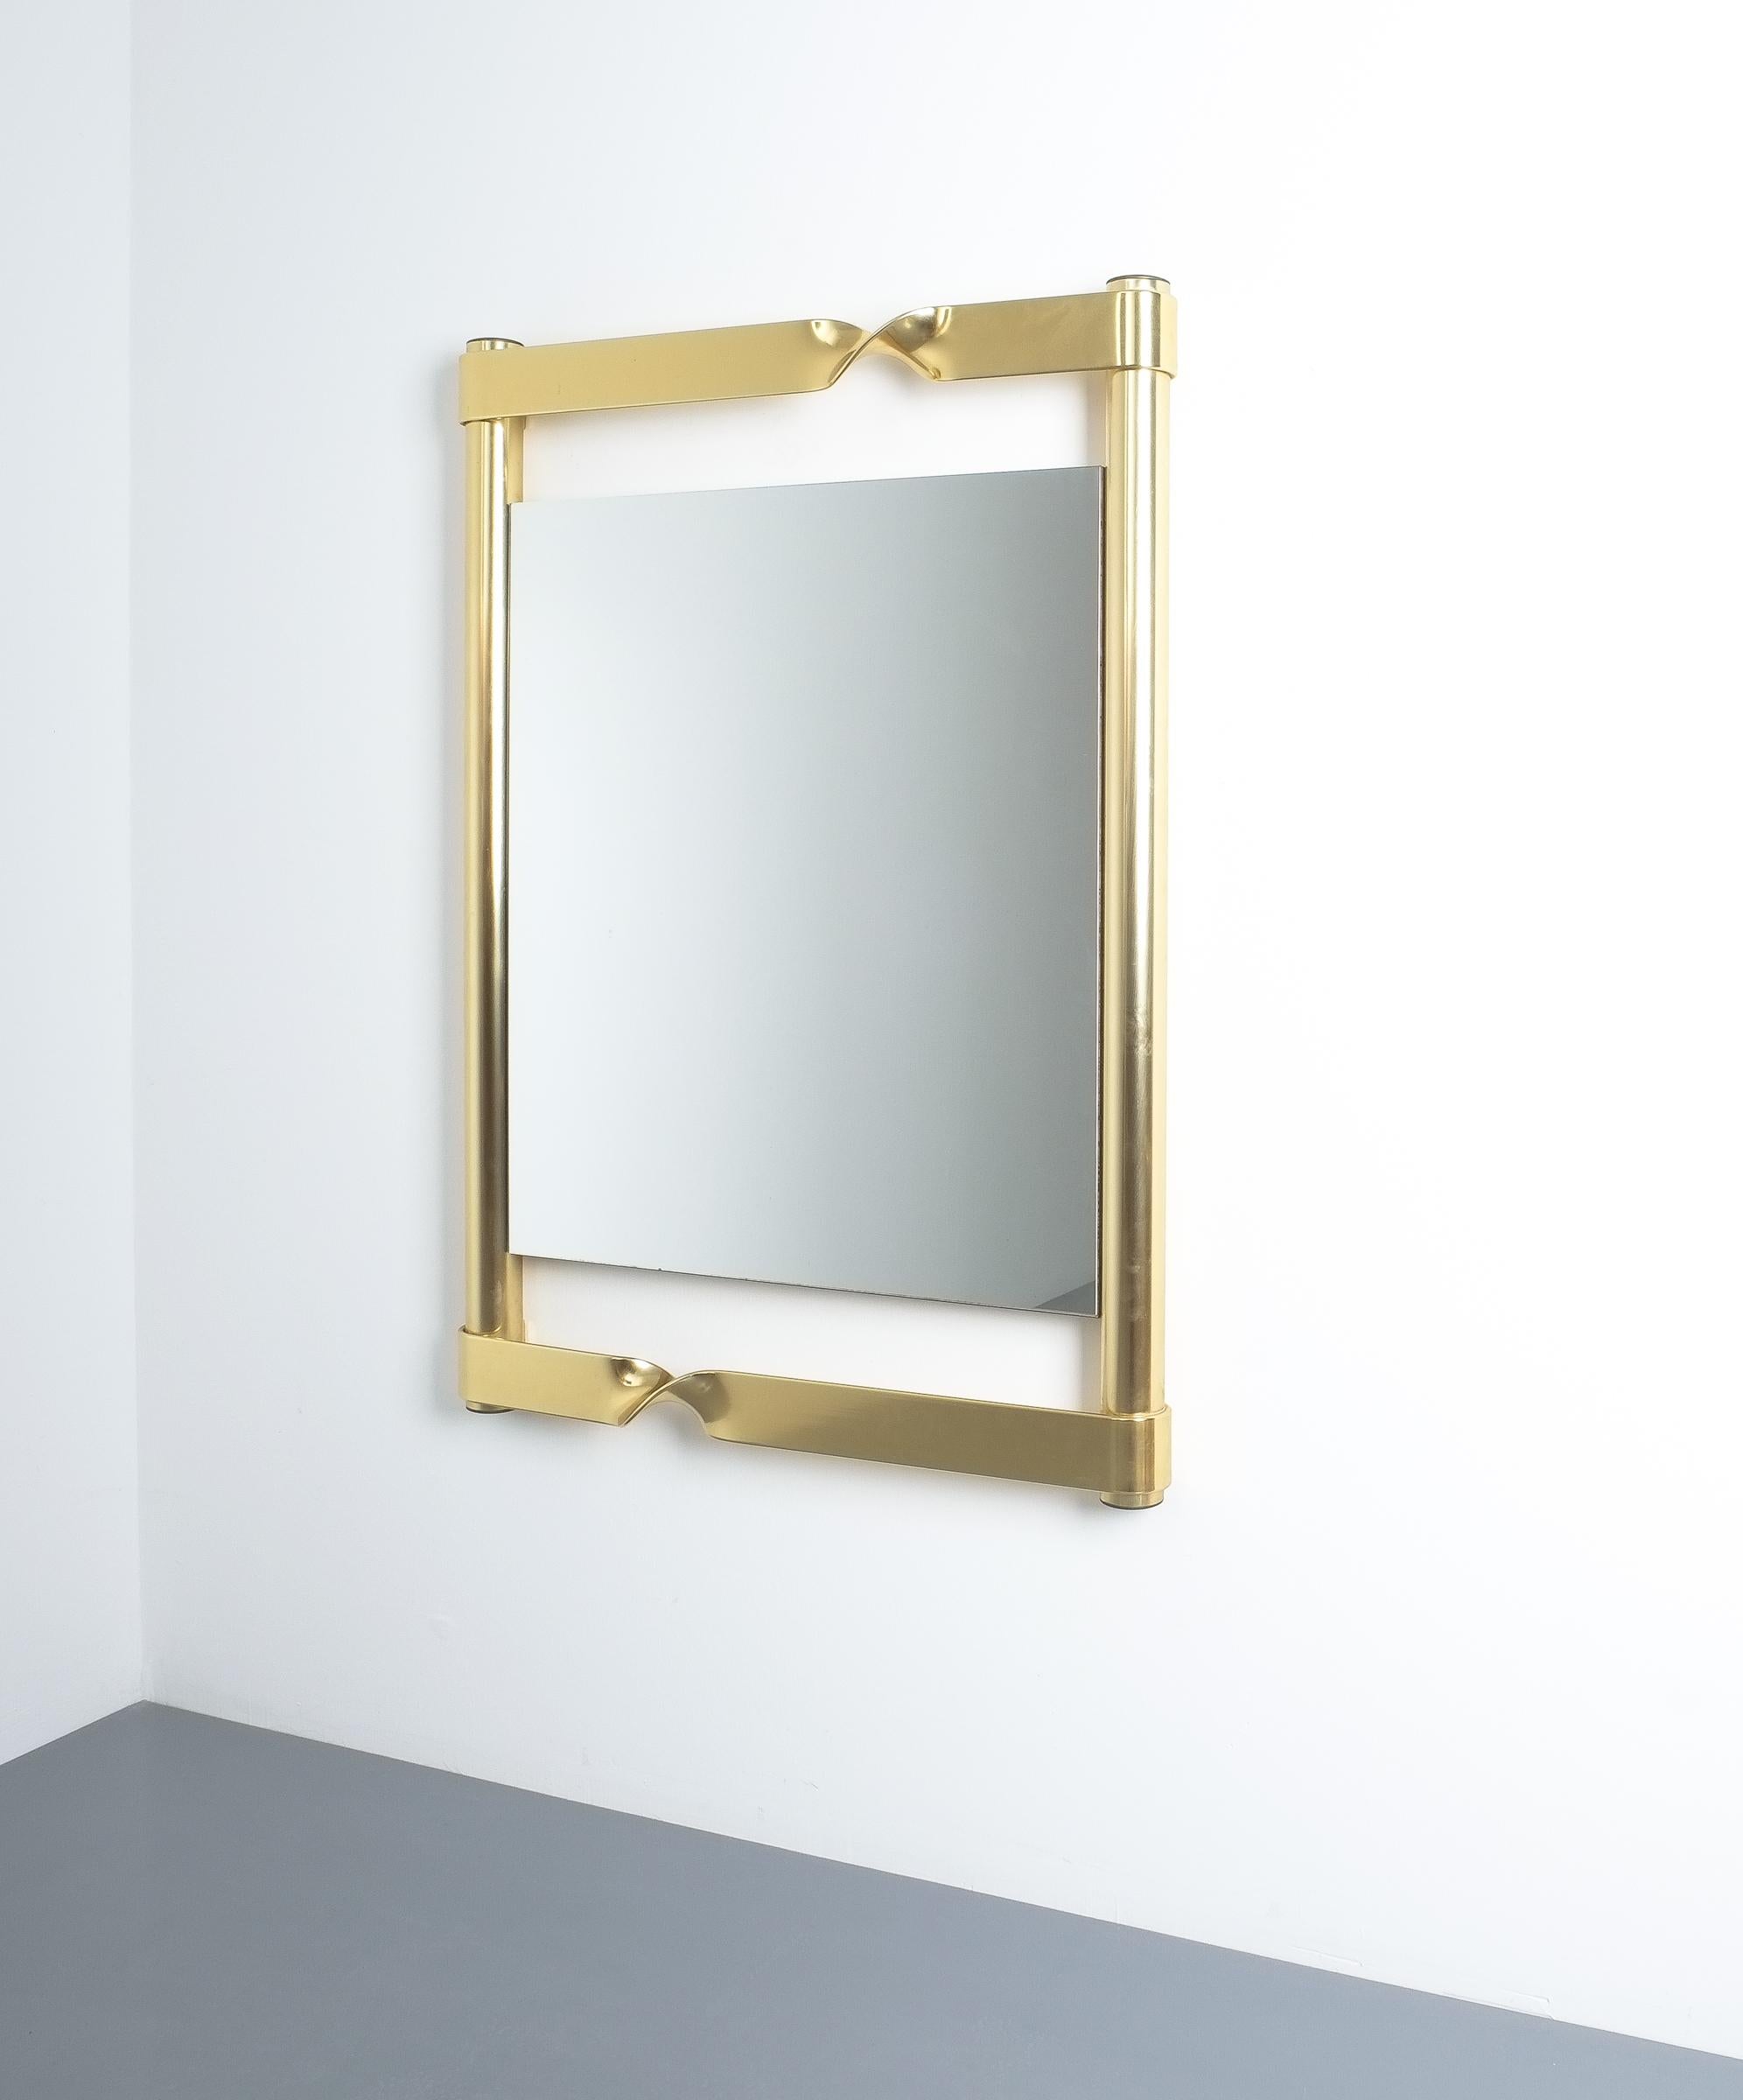 Luciano Frigerio Midcentury Brass Mirror with Twisted Frame, Italy, circa 1970 For Sale 2